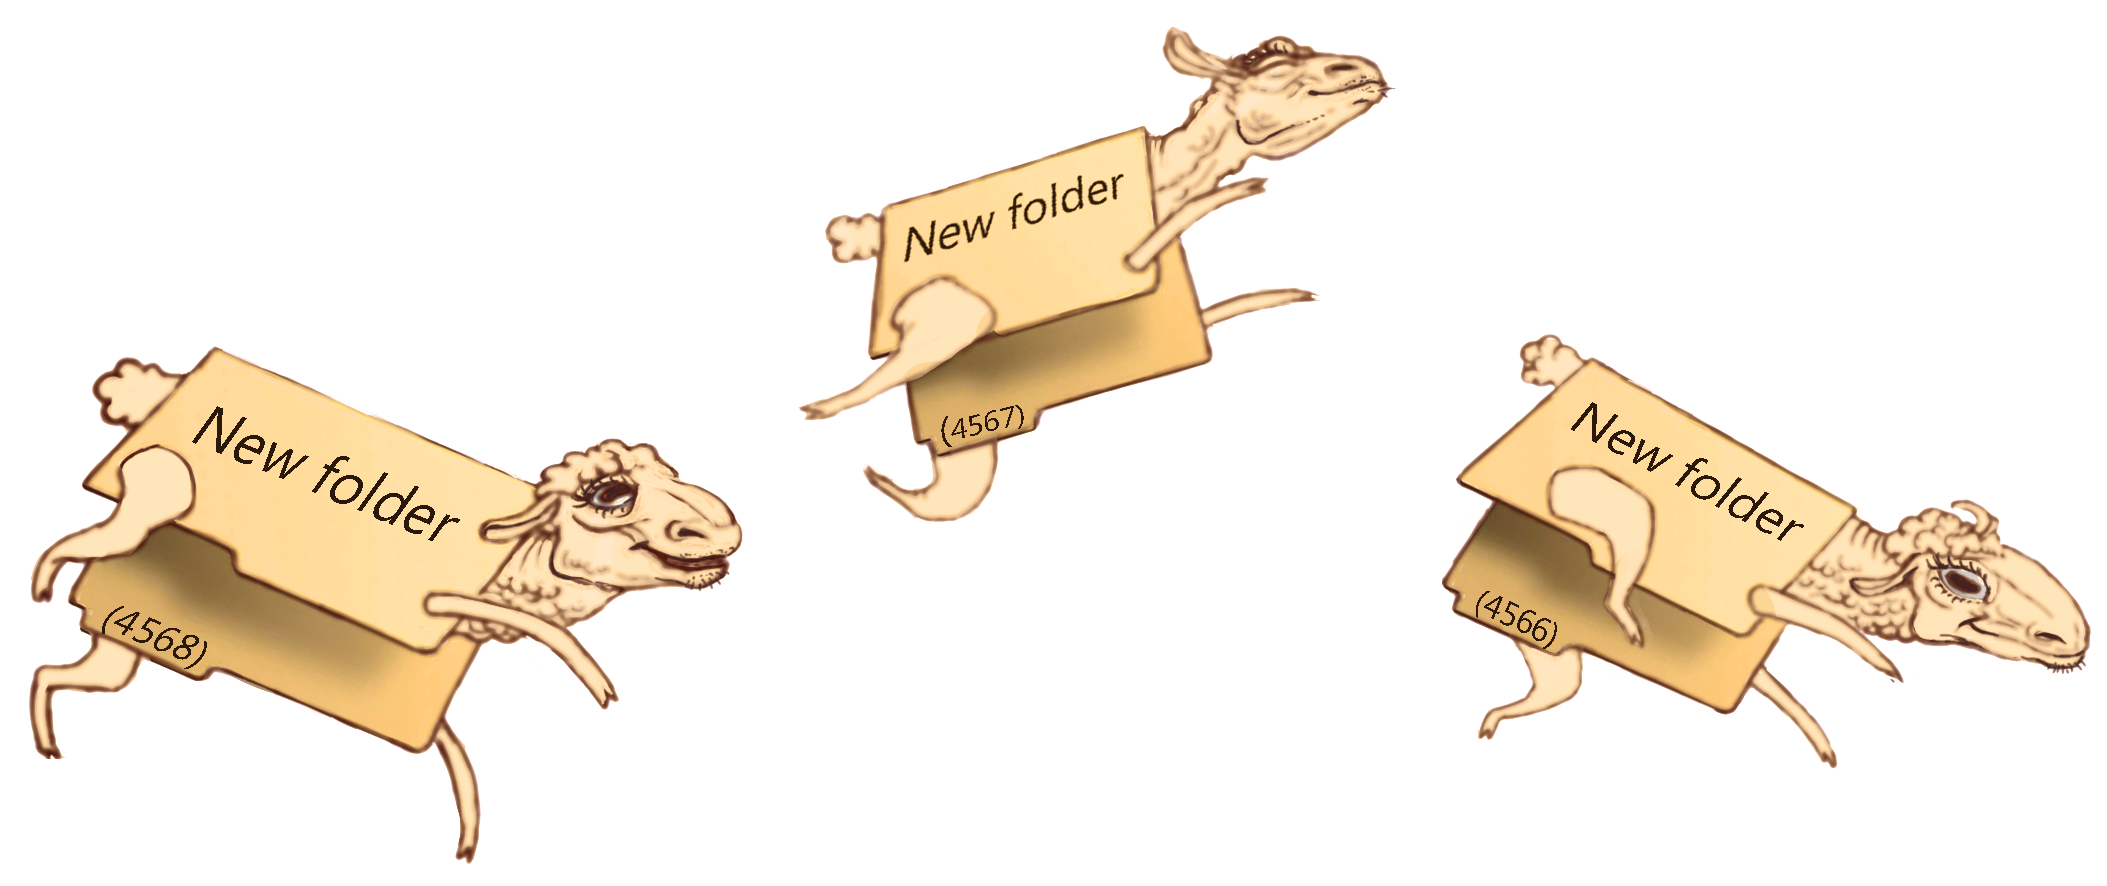 Files-and-Folder.png